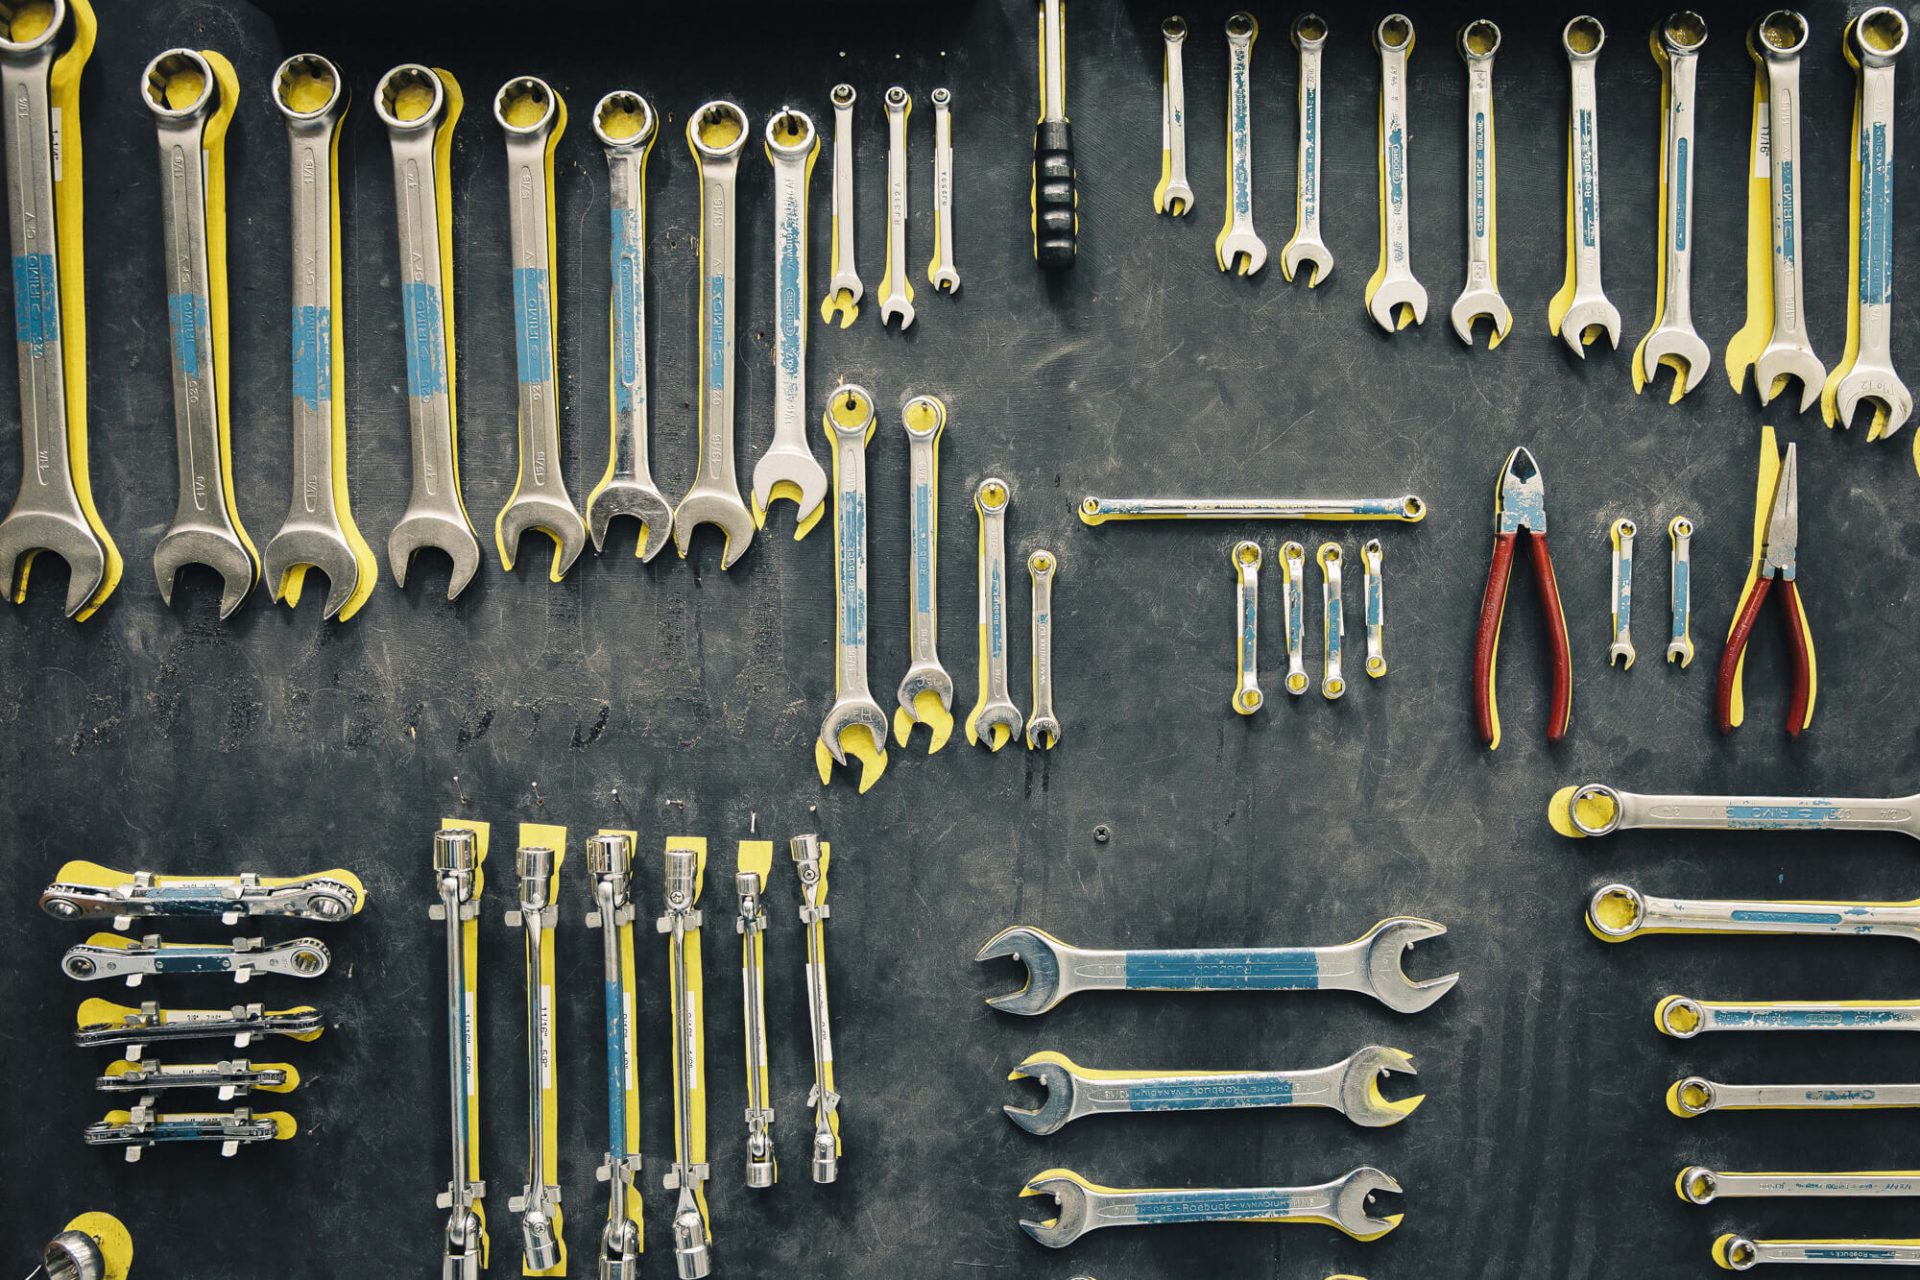 Wrenches and pliers hang up on a wall - tools for engineering courses in 